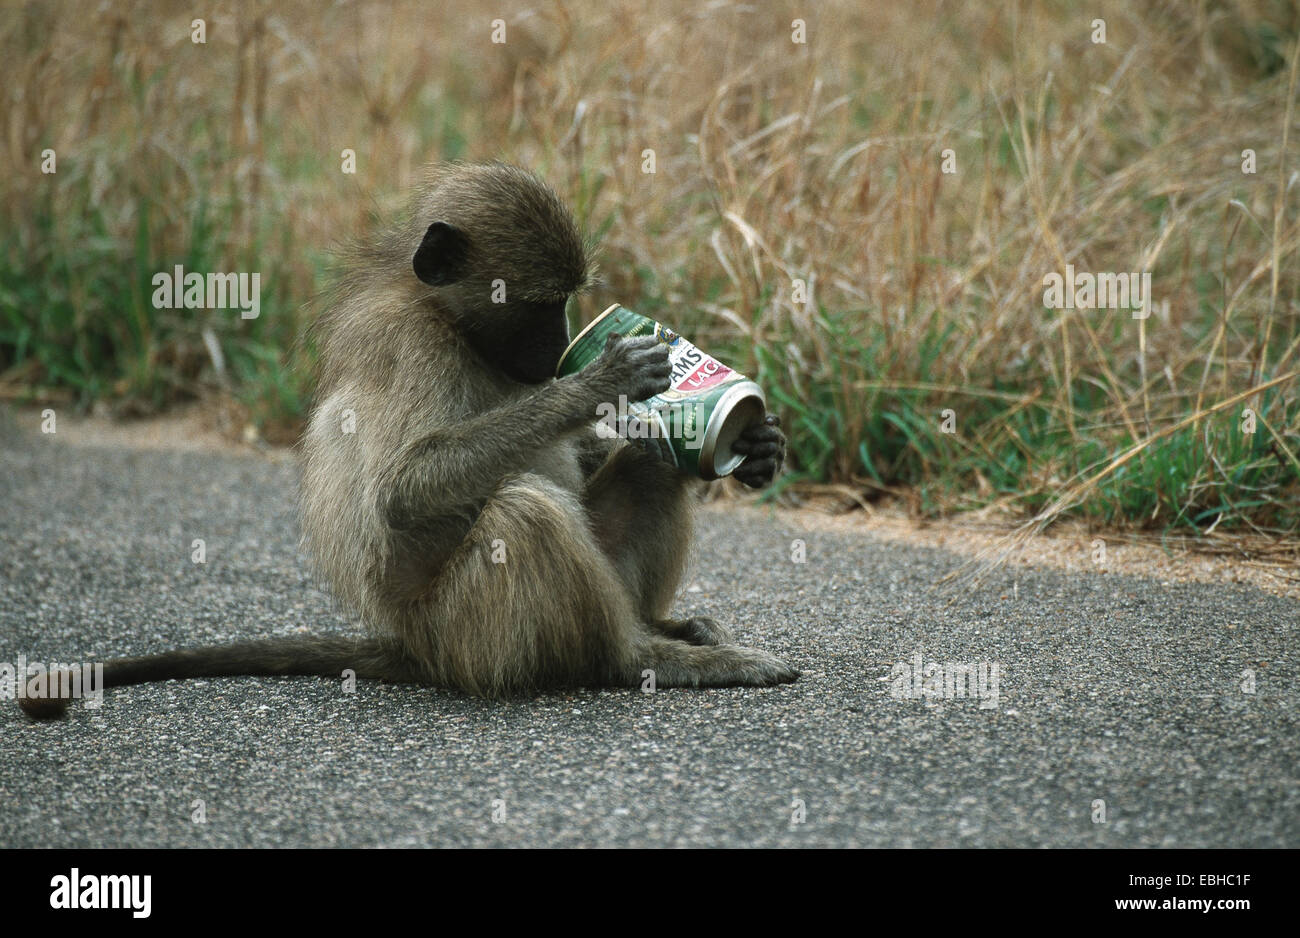 chacma baboon (Papio ursinus), young, sitting on street, looking into a box, Okt 01. Stock Photo